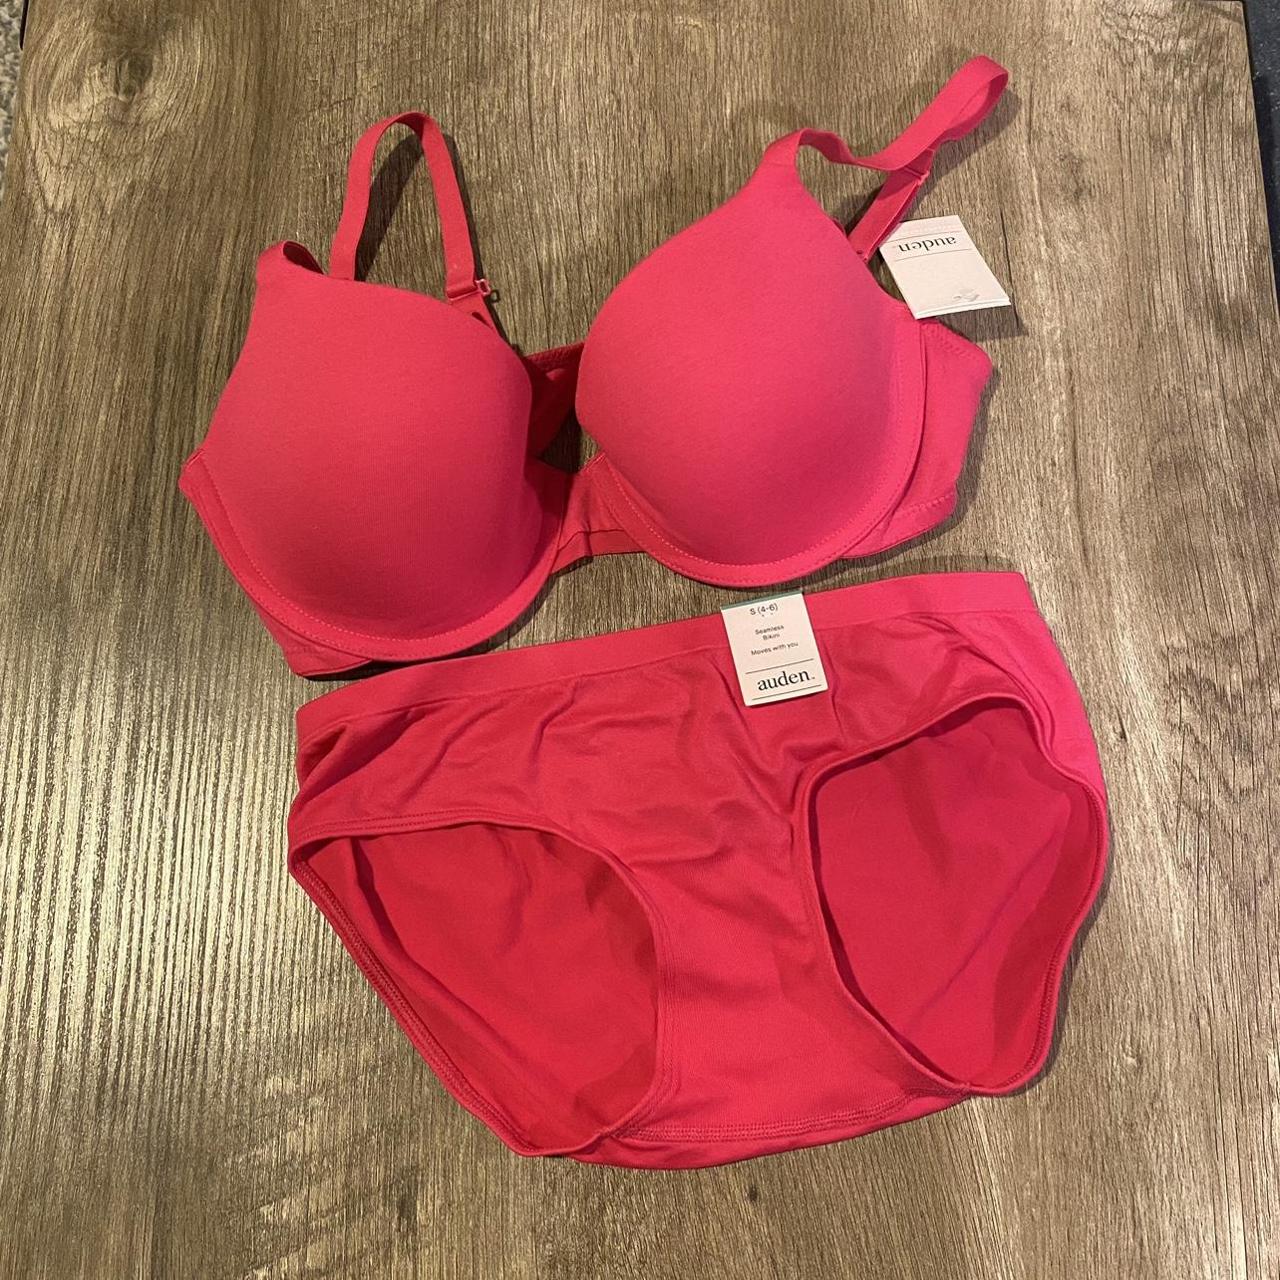 Hot pink bra and underwear set, Bra is size 36B and